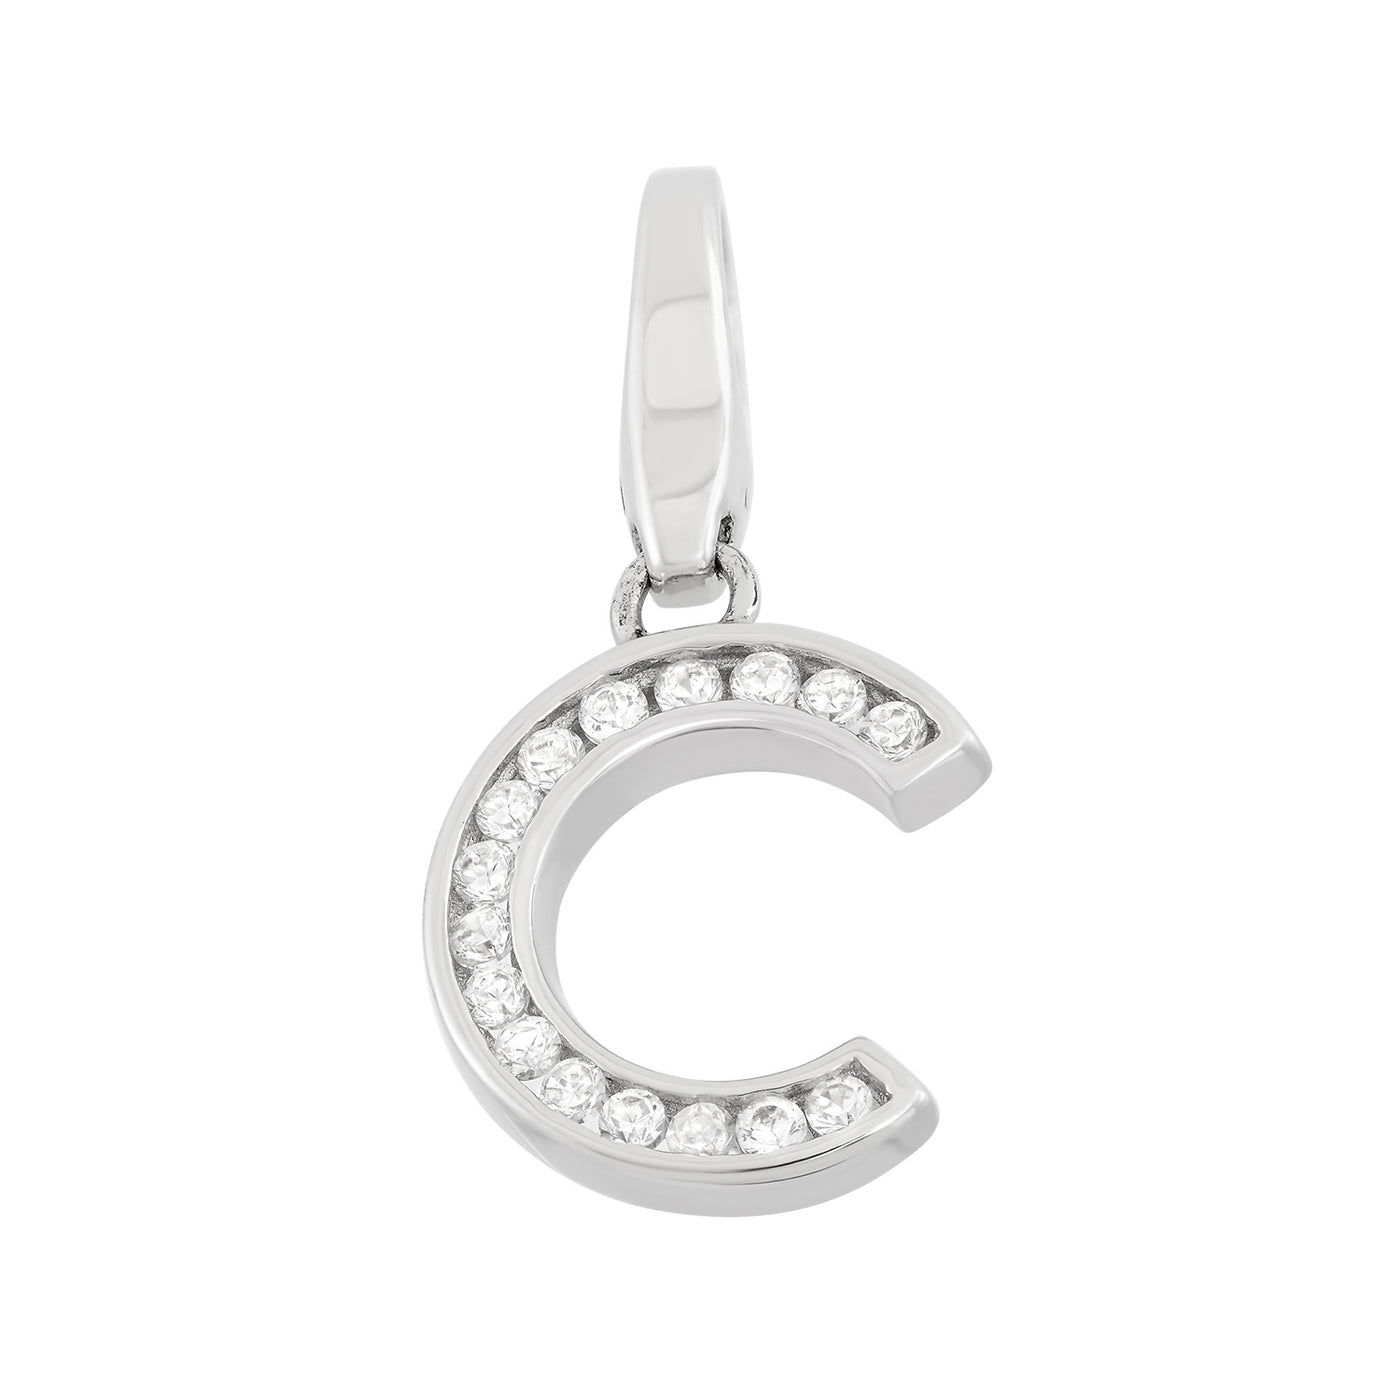 Rebecca Sloane Sterling Silver "C" With Cz Charm